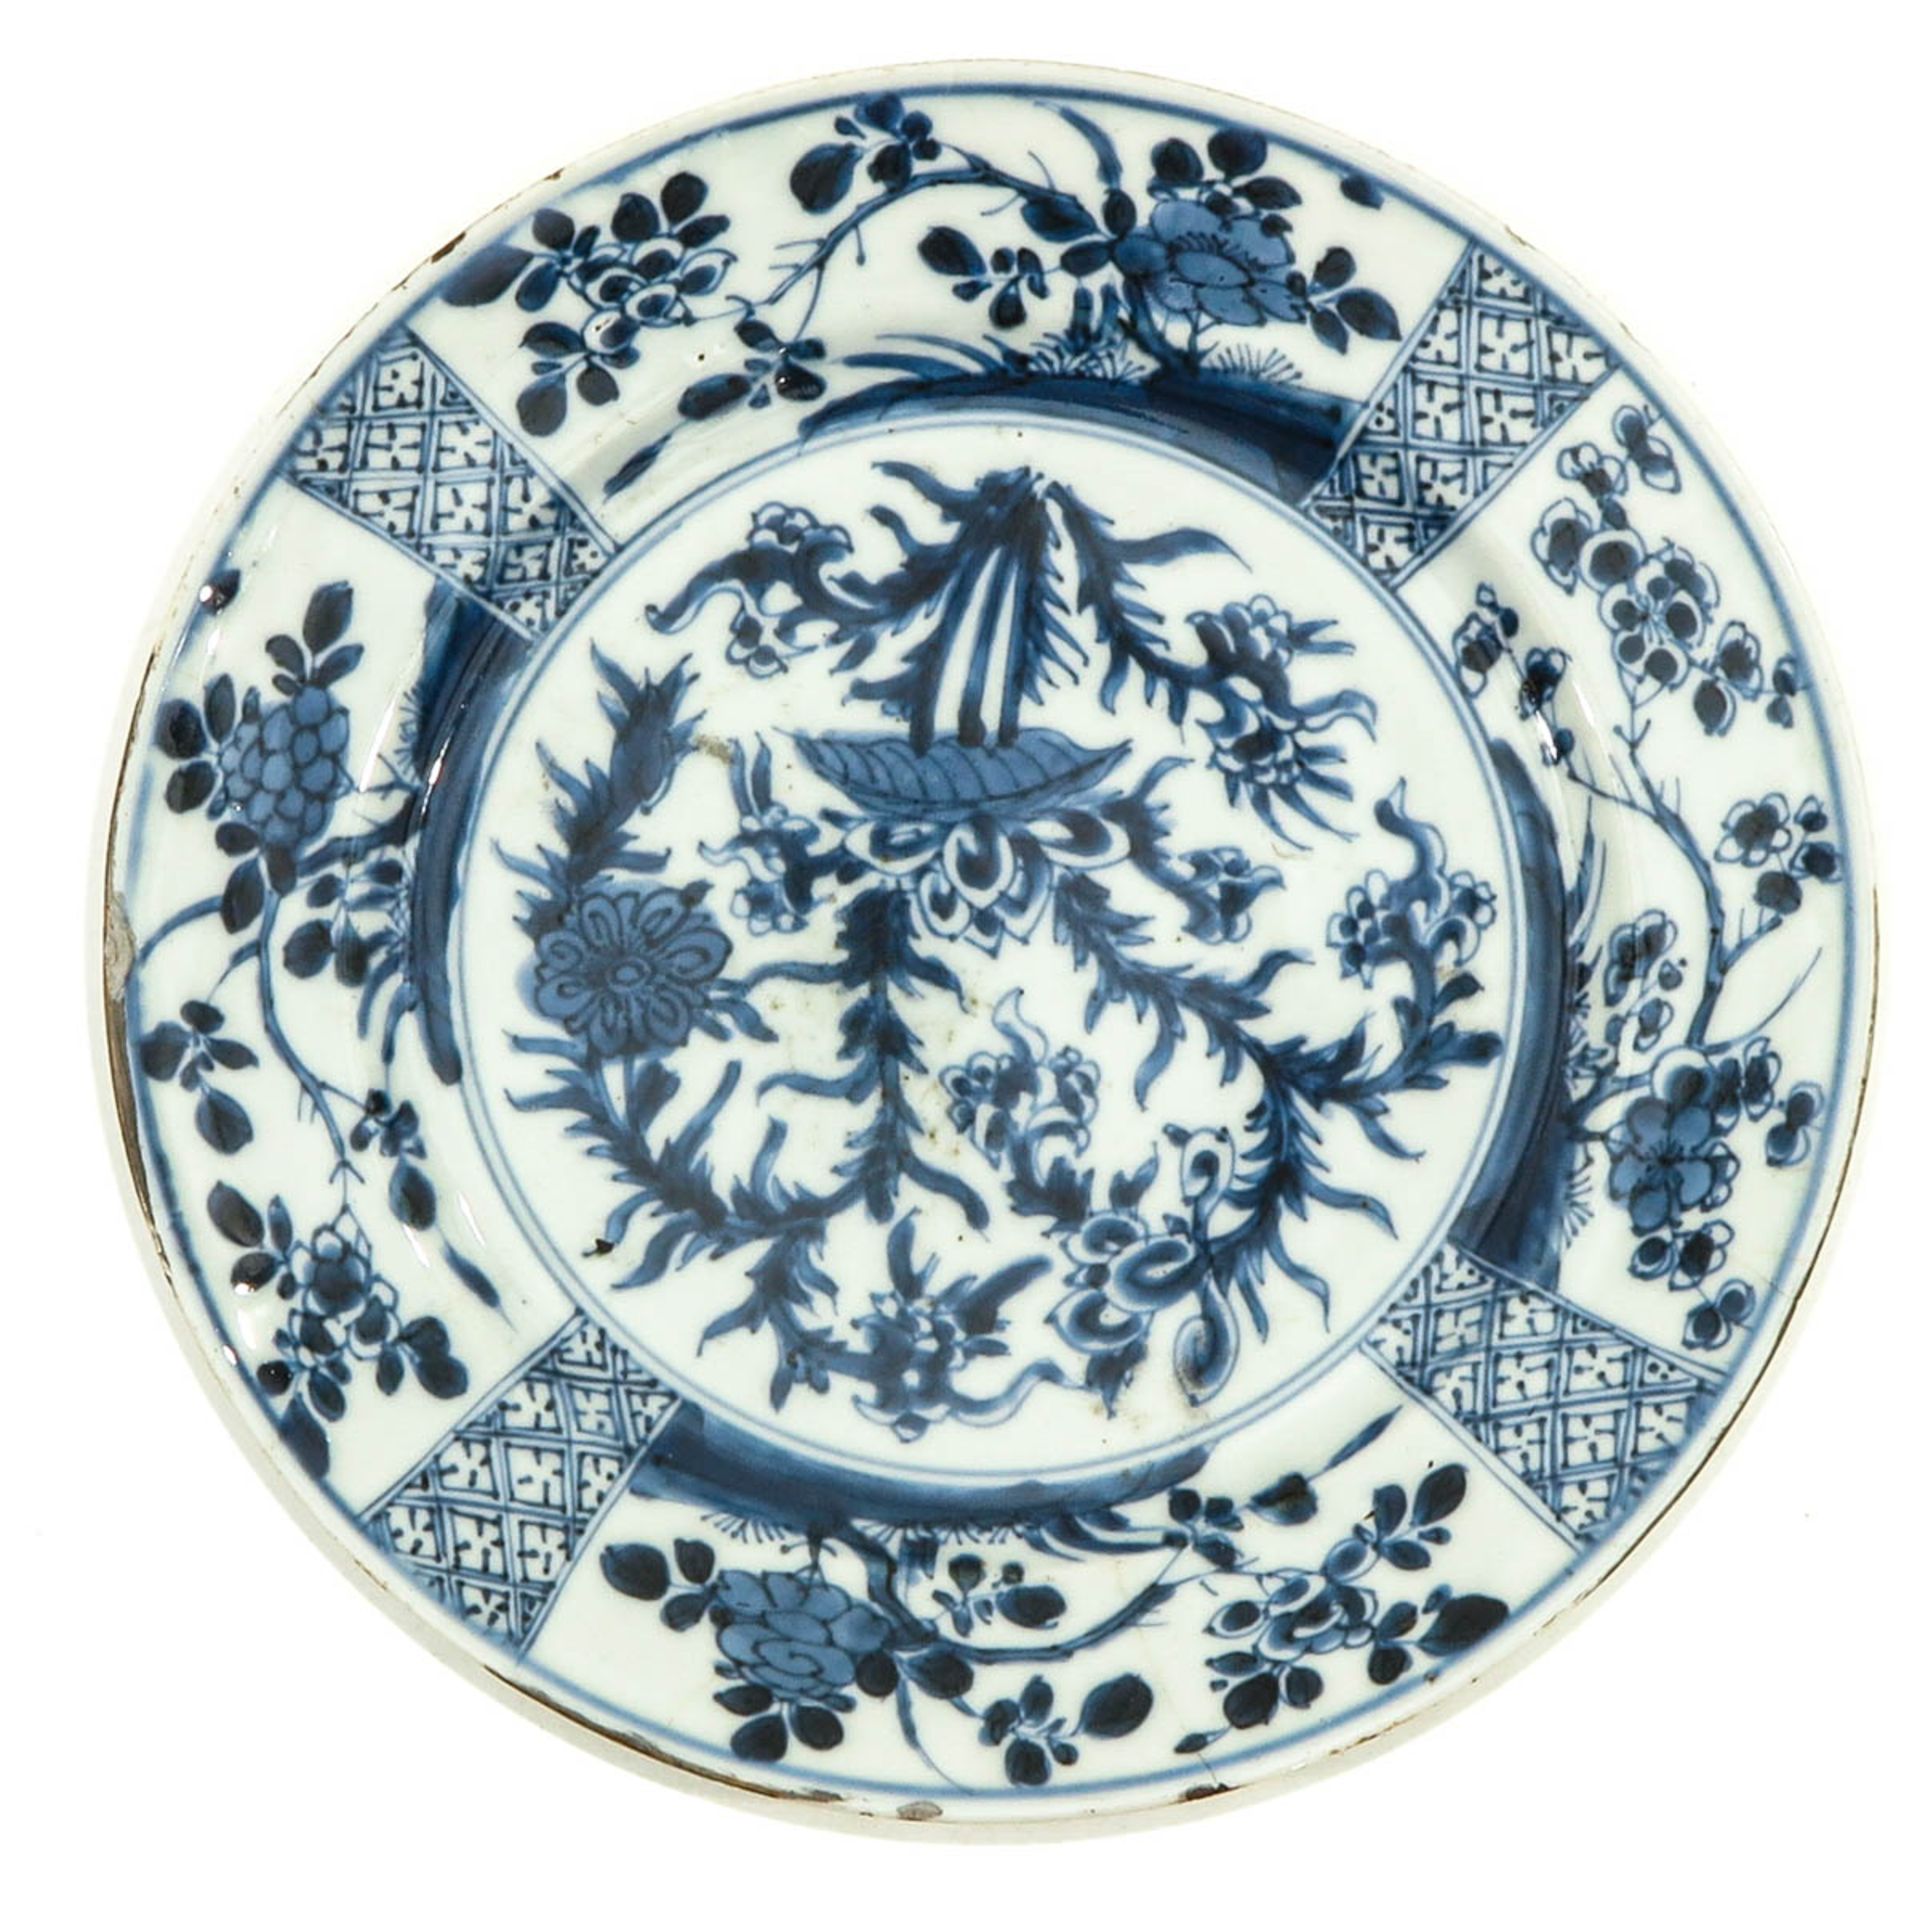 A Collection of 5 Blue and White Plates - Image 7 of 10